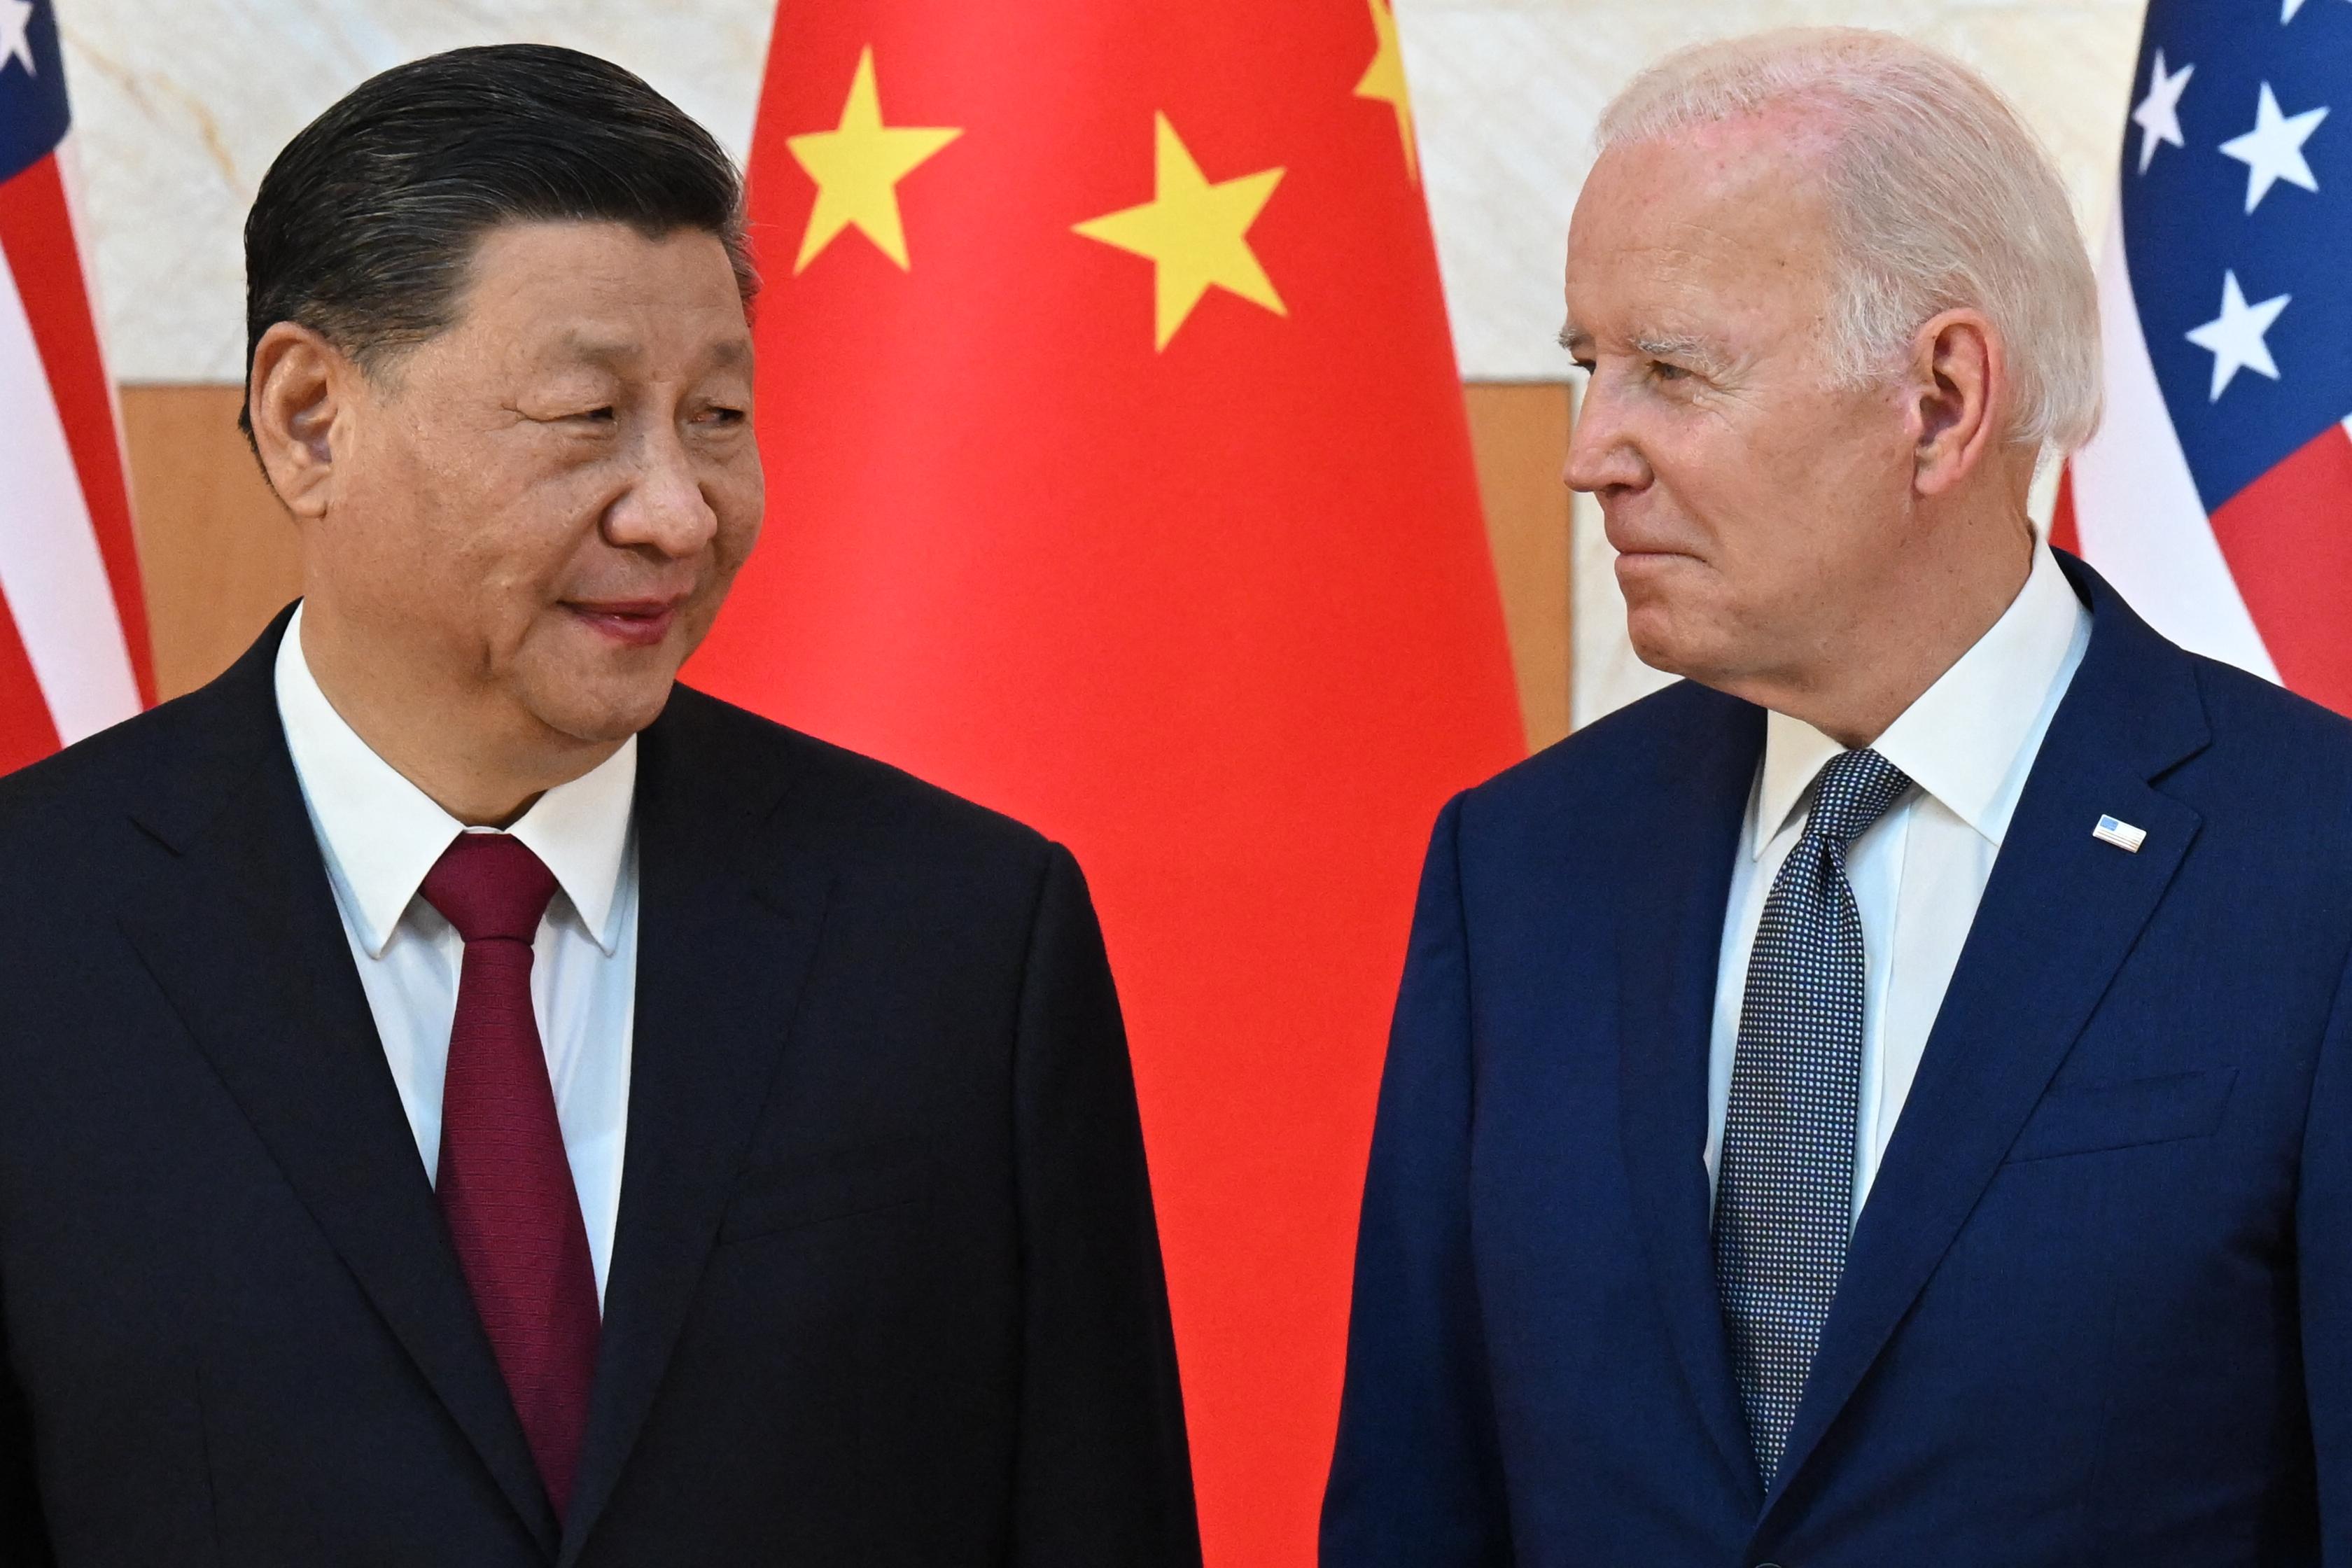 Chinese President Xi Jinping and U.S. President Joe Biden standing side by side and looking at each other, with Chinese and American flags in the background.